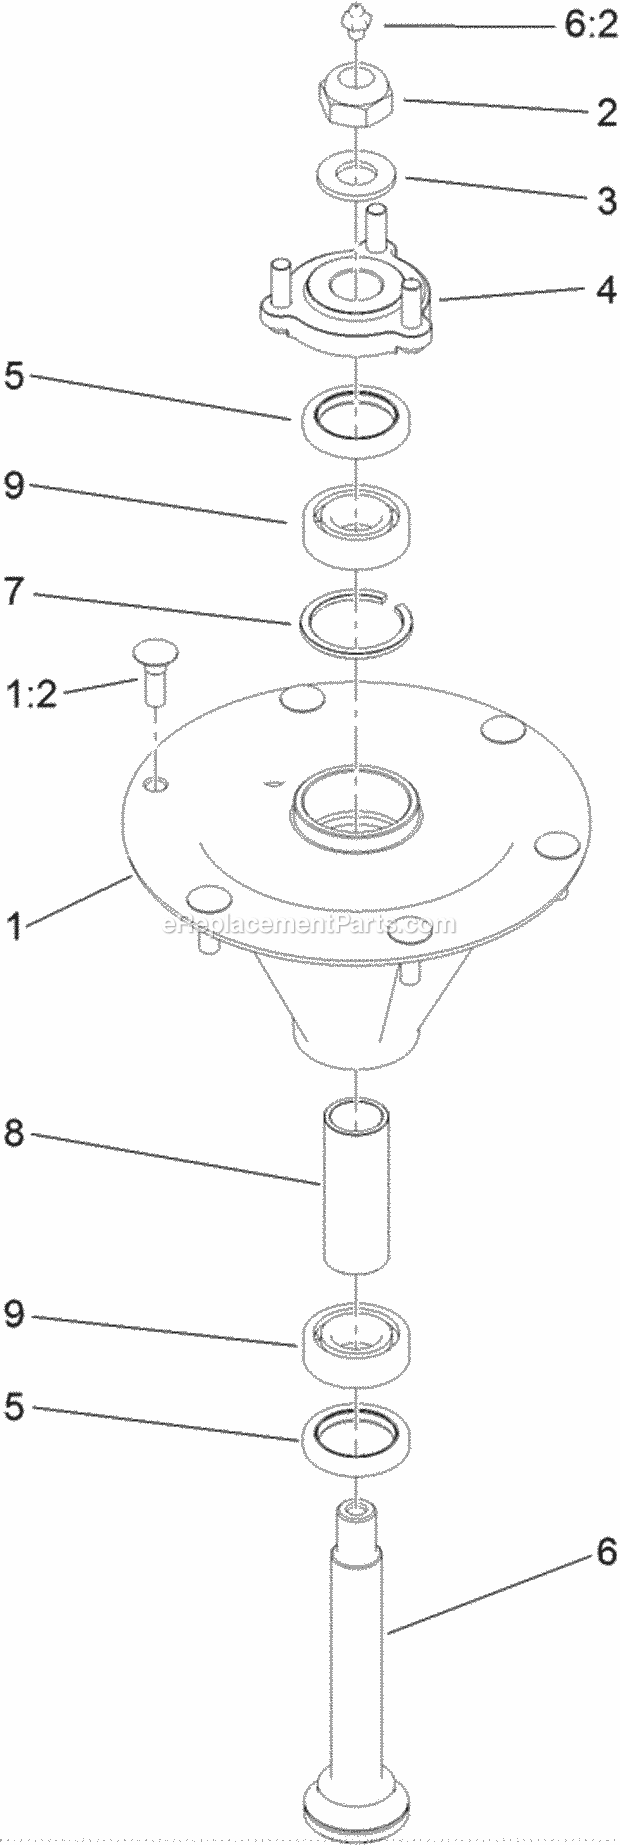 Toro 74265TE (316000001-316999999) Z Master Professional 7000 Series Riding Mower, With 152cm Turbo Force Side Discharge Mower, Spindle Assembly No. 119-8560 Diagram